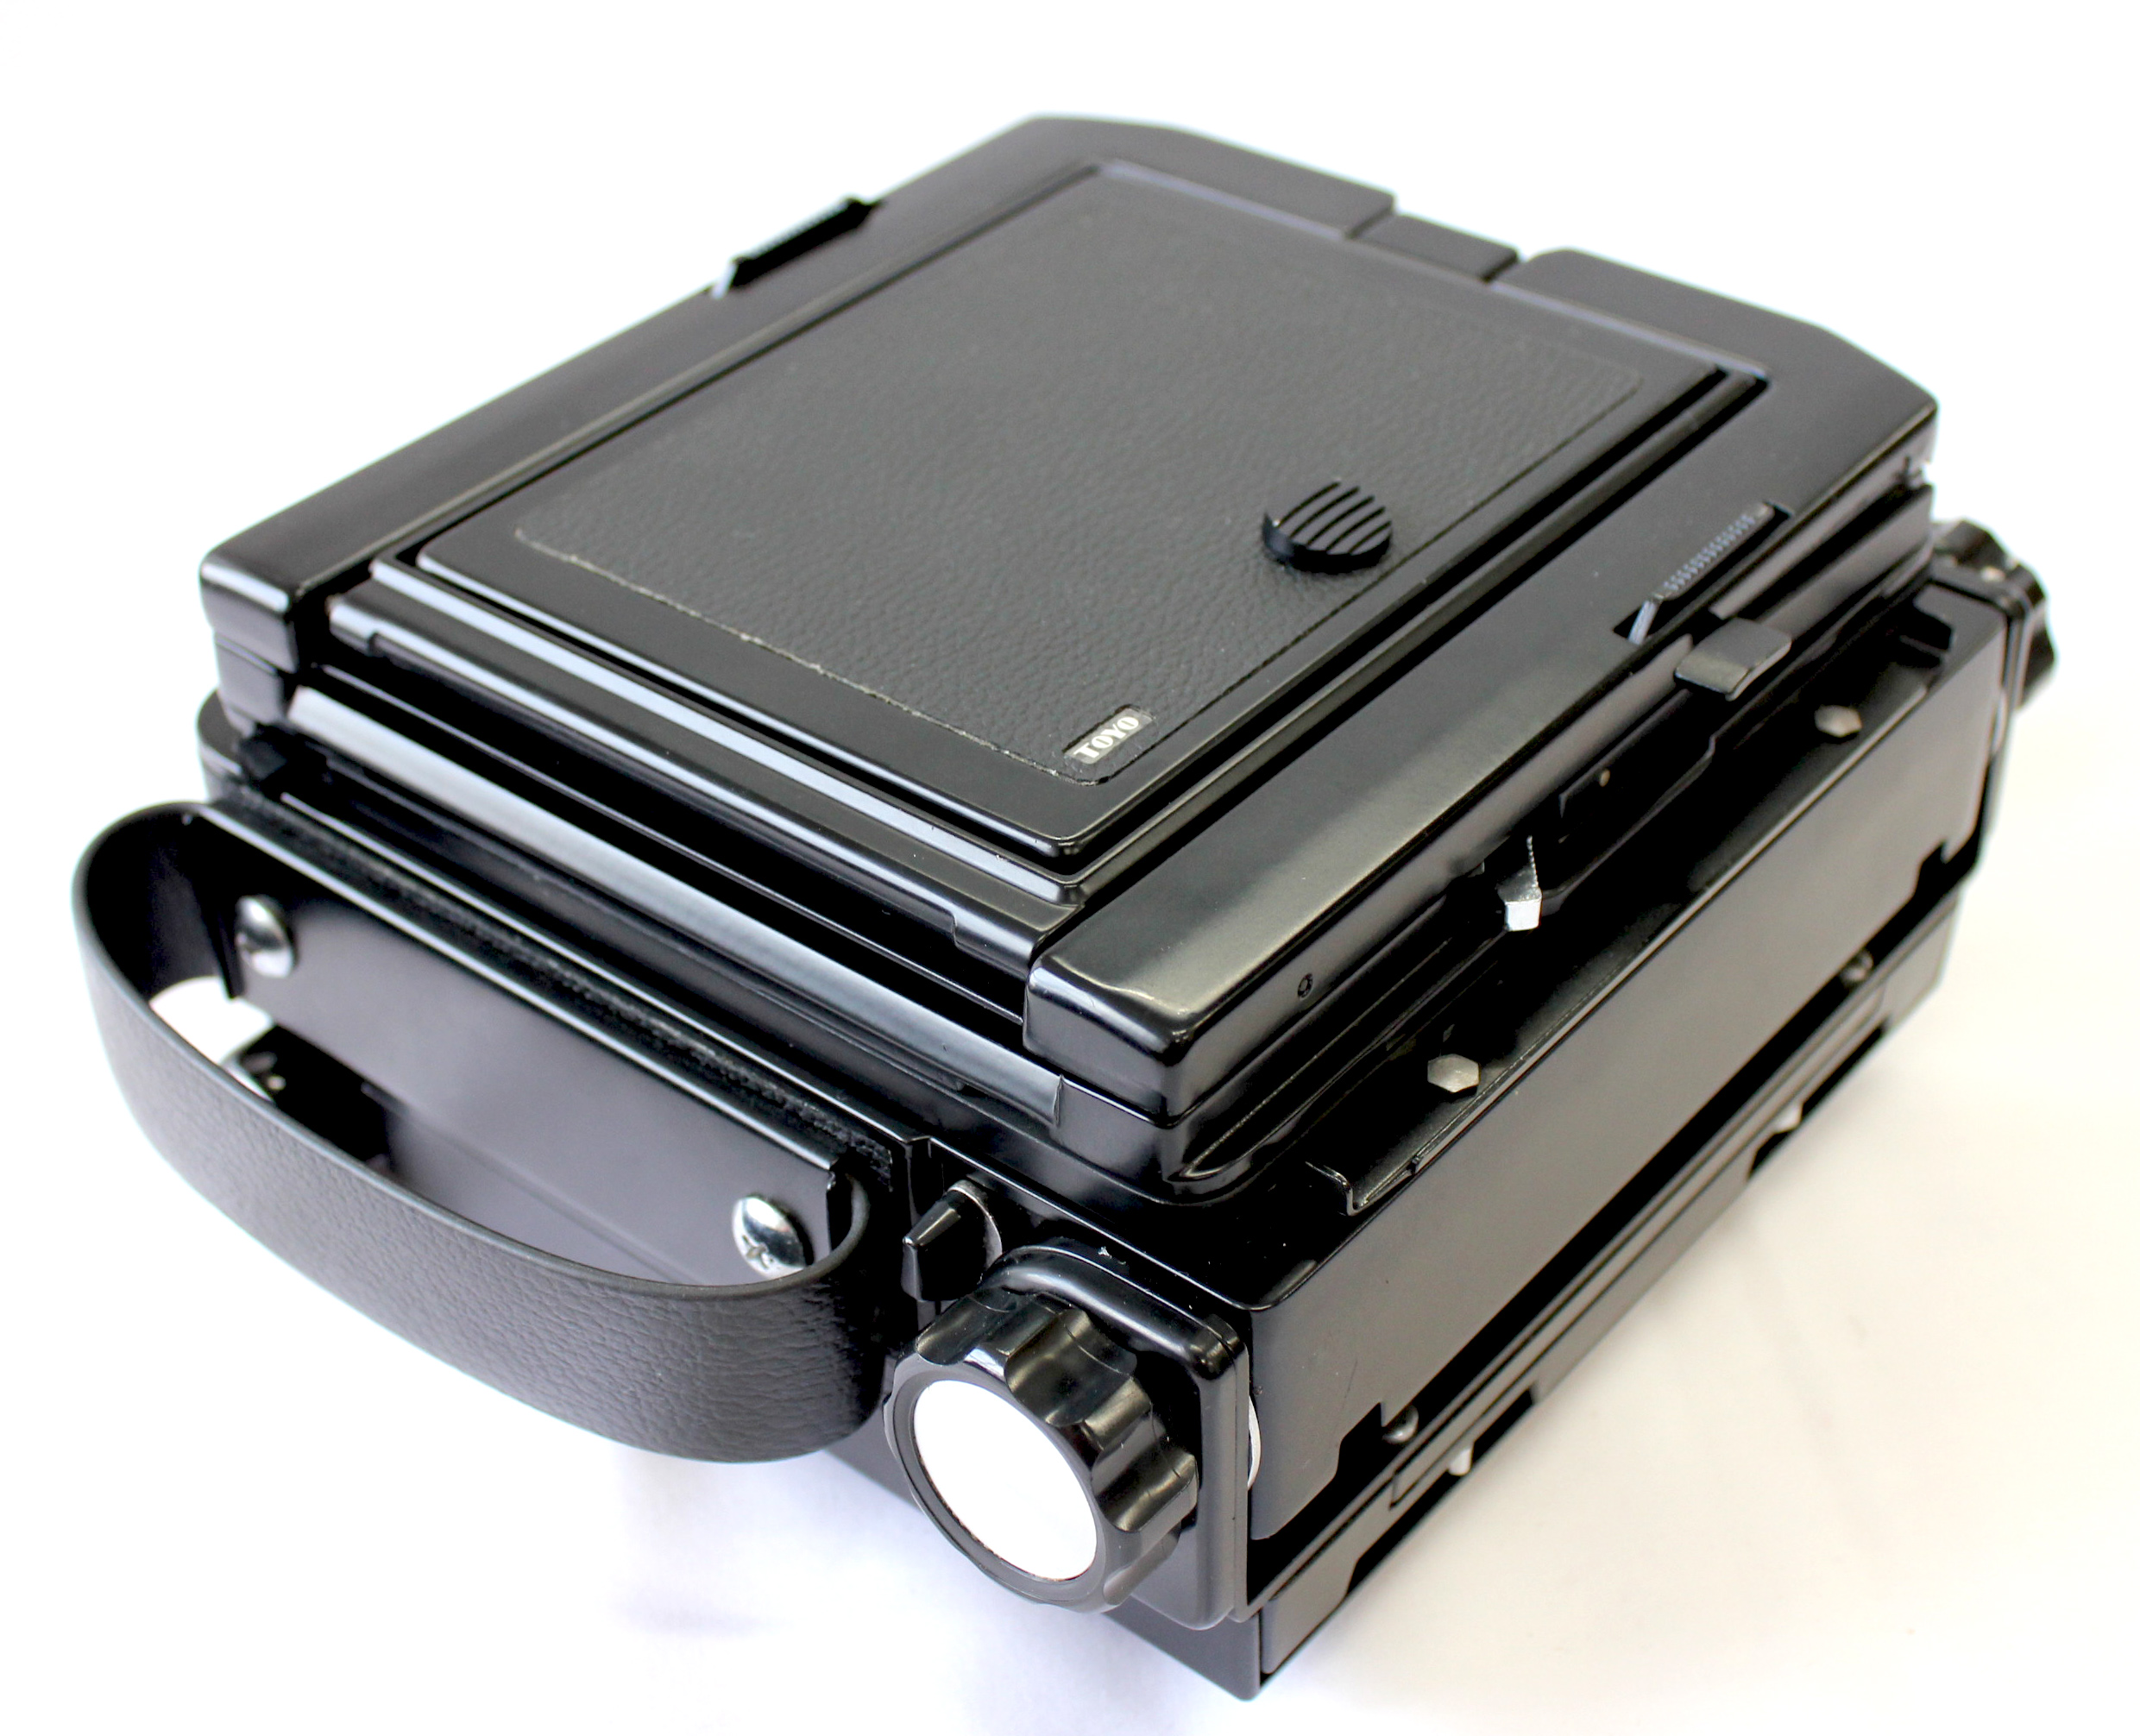  Toyo Field 45A 4x5 Large Format Film Camera with Revolving Back and 3 Cut Film Holders from Japan Photo 13